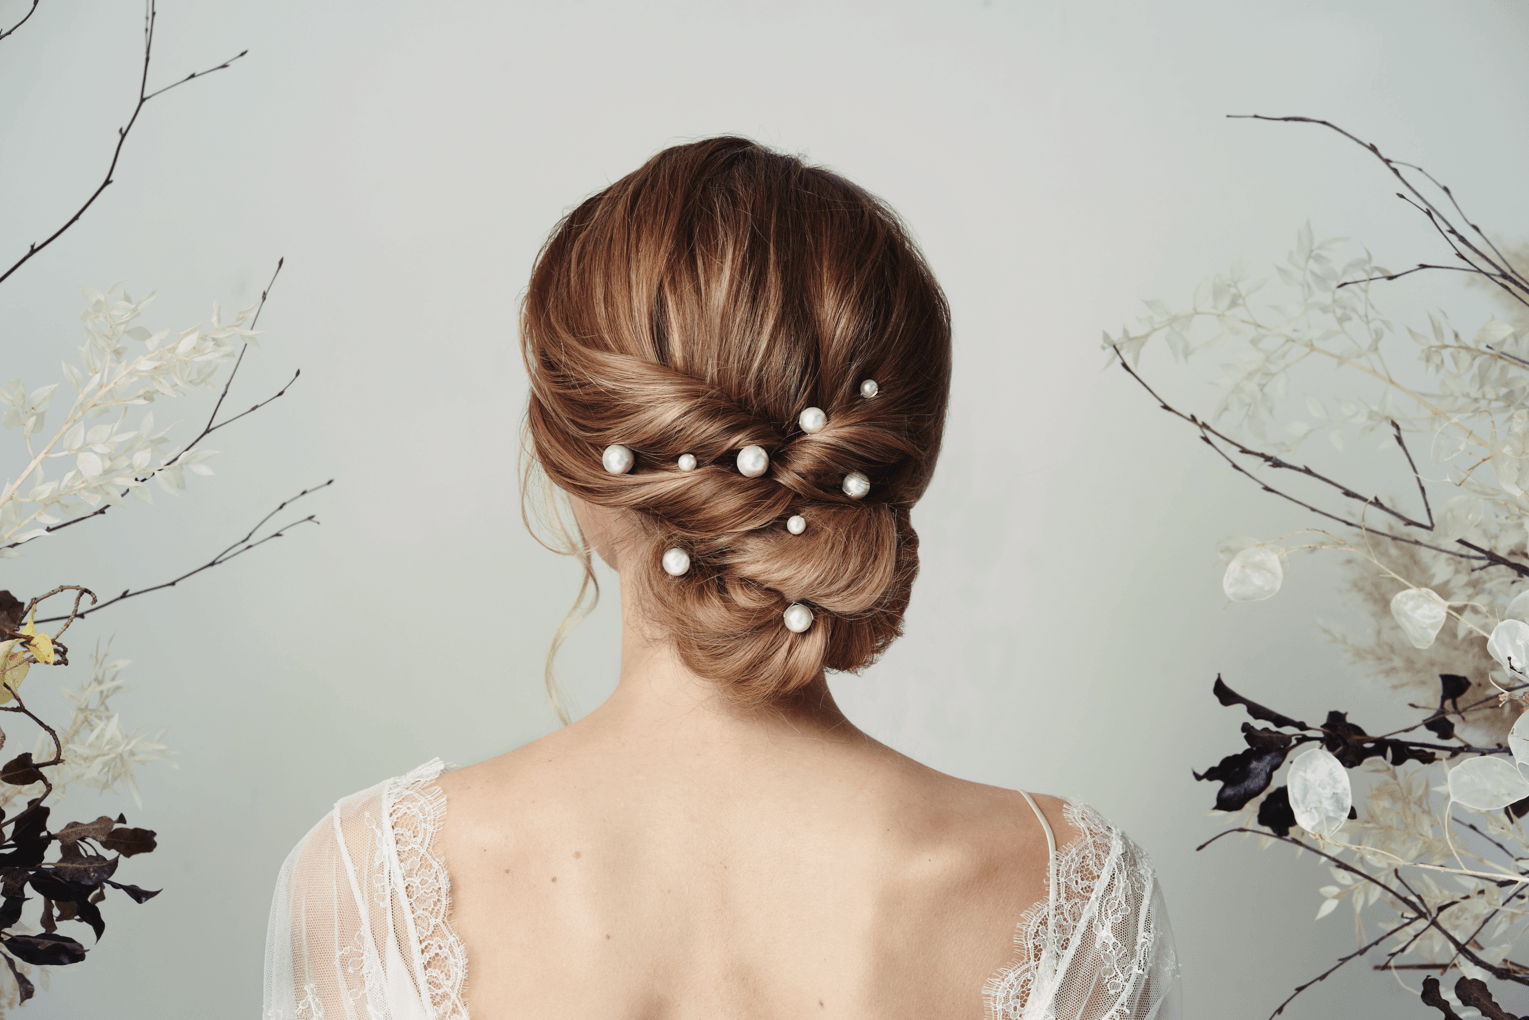 50 Gorgeous Wedding Hairstyles With Veil and Tiara for the Bride